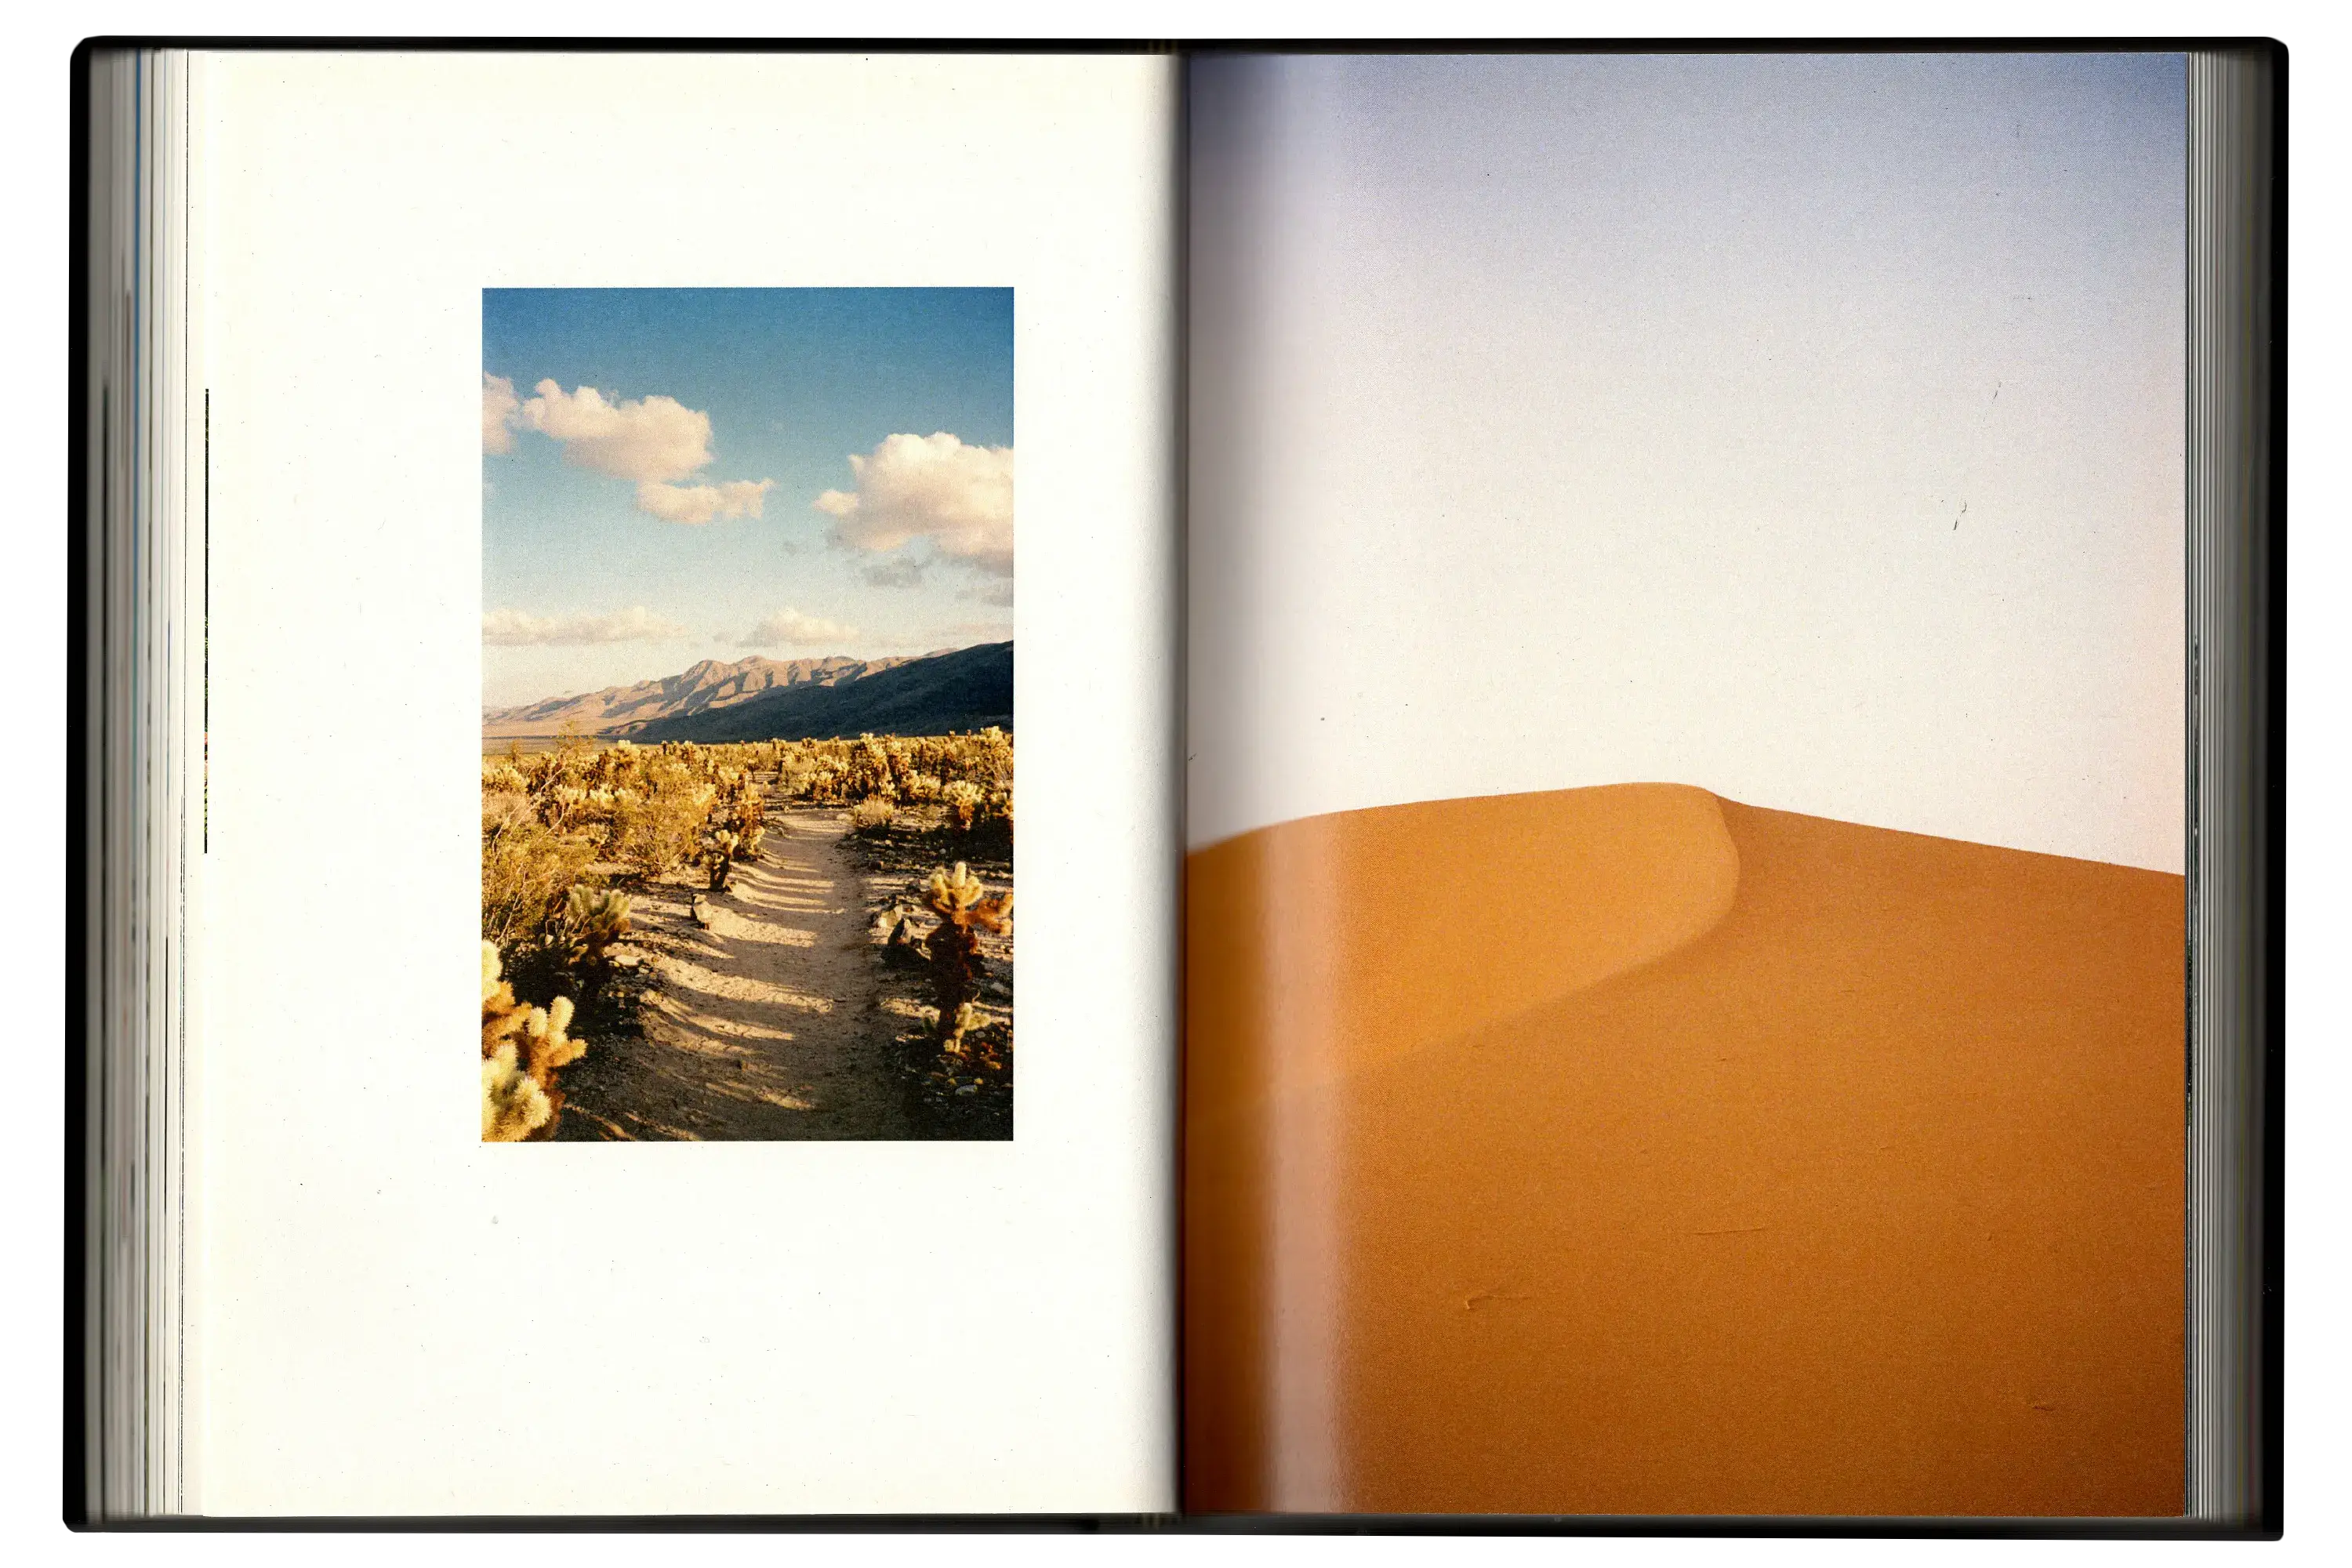 Imperfect Photo Book - left page shows cropped image of desert field of cacti, right page full bleed image of desert sand dune